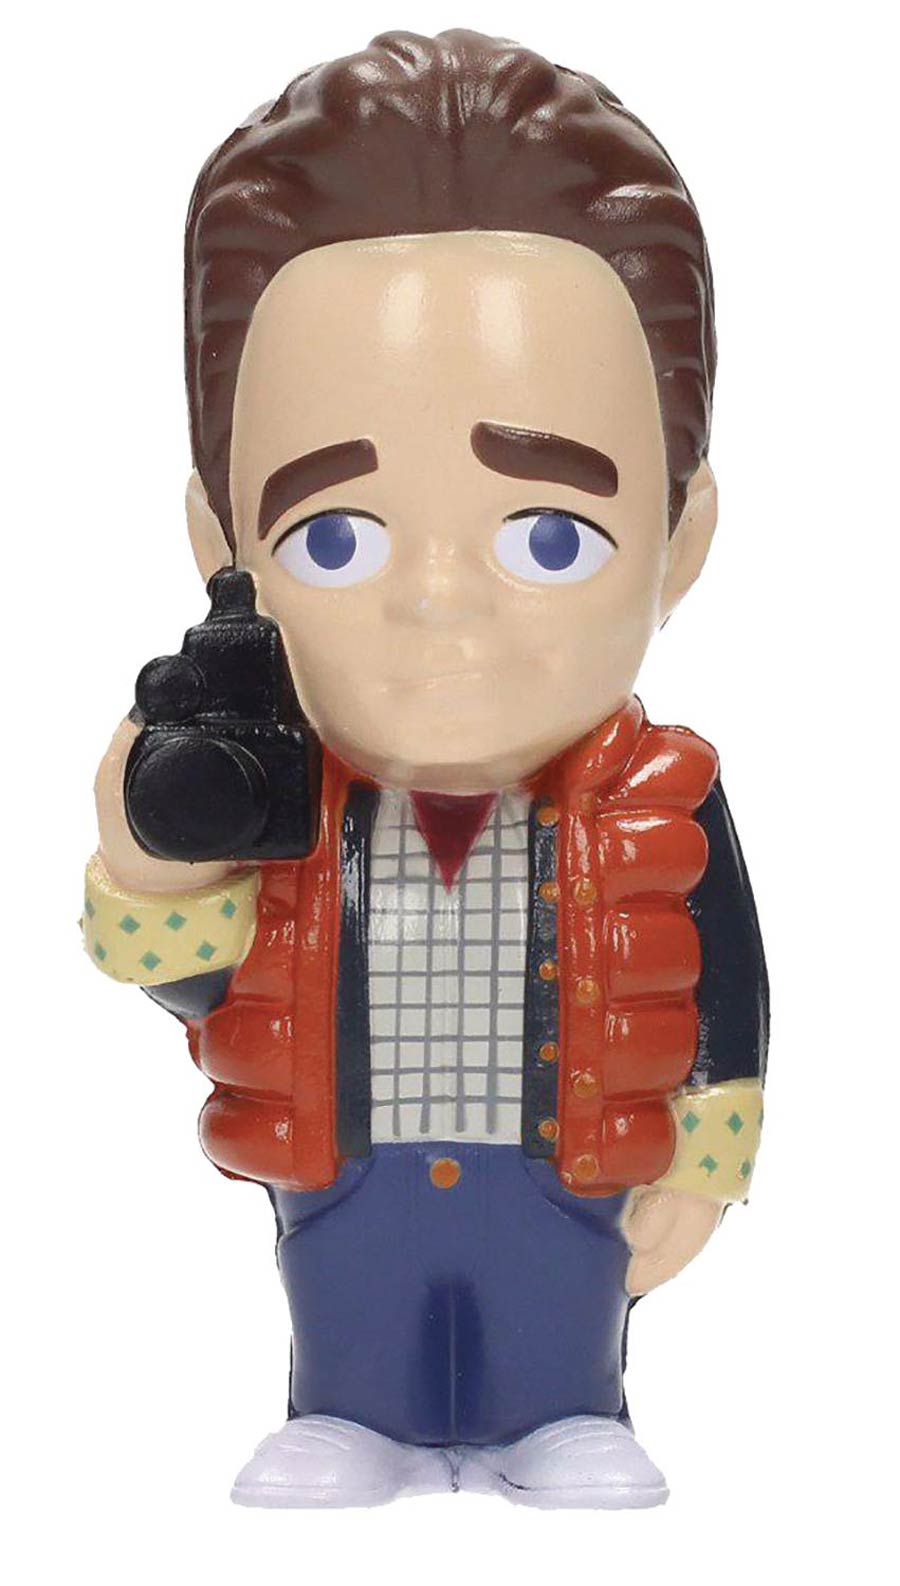 Back To The Future Stress Doll - Marty McFly